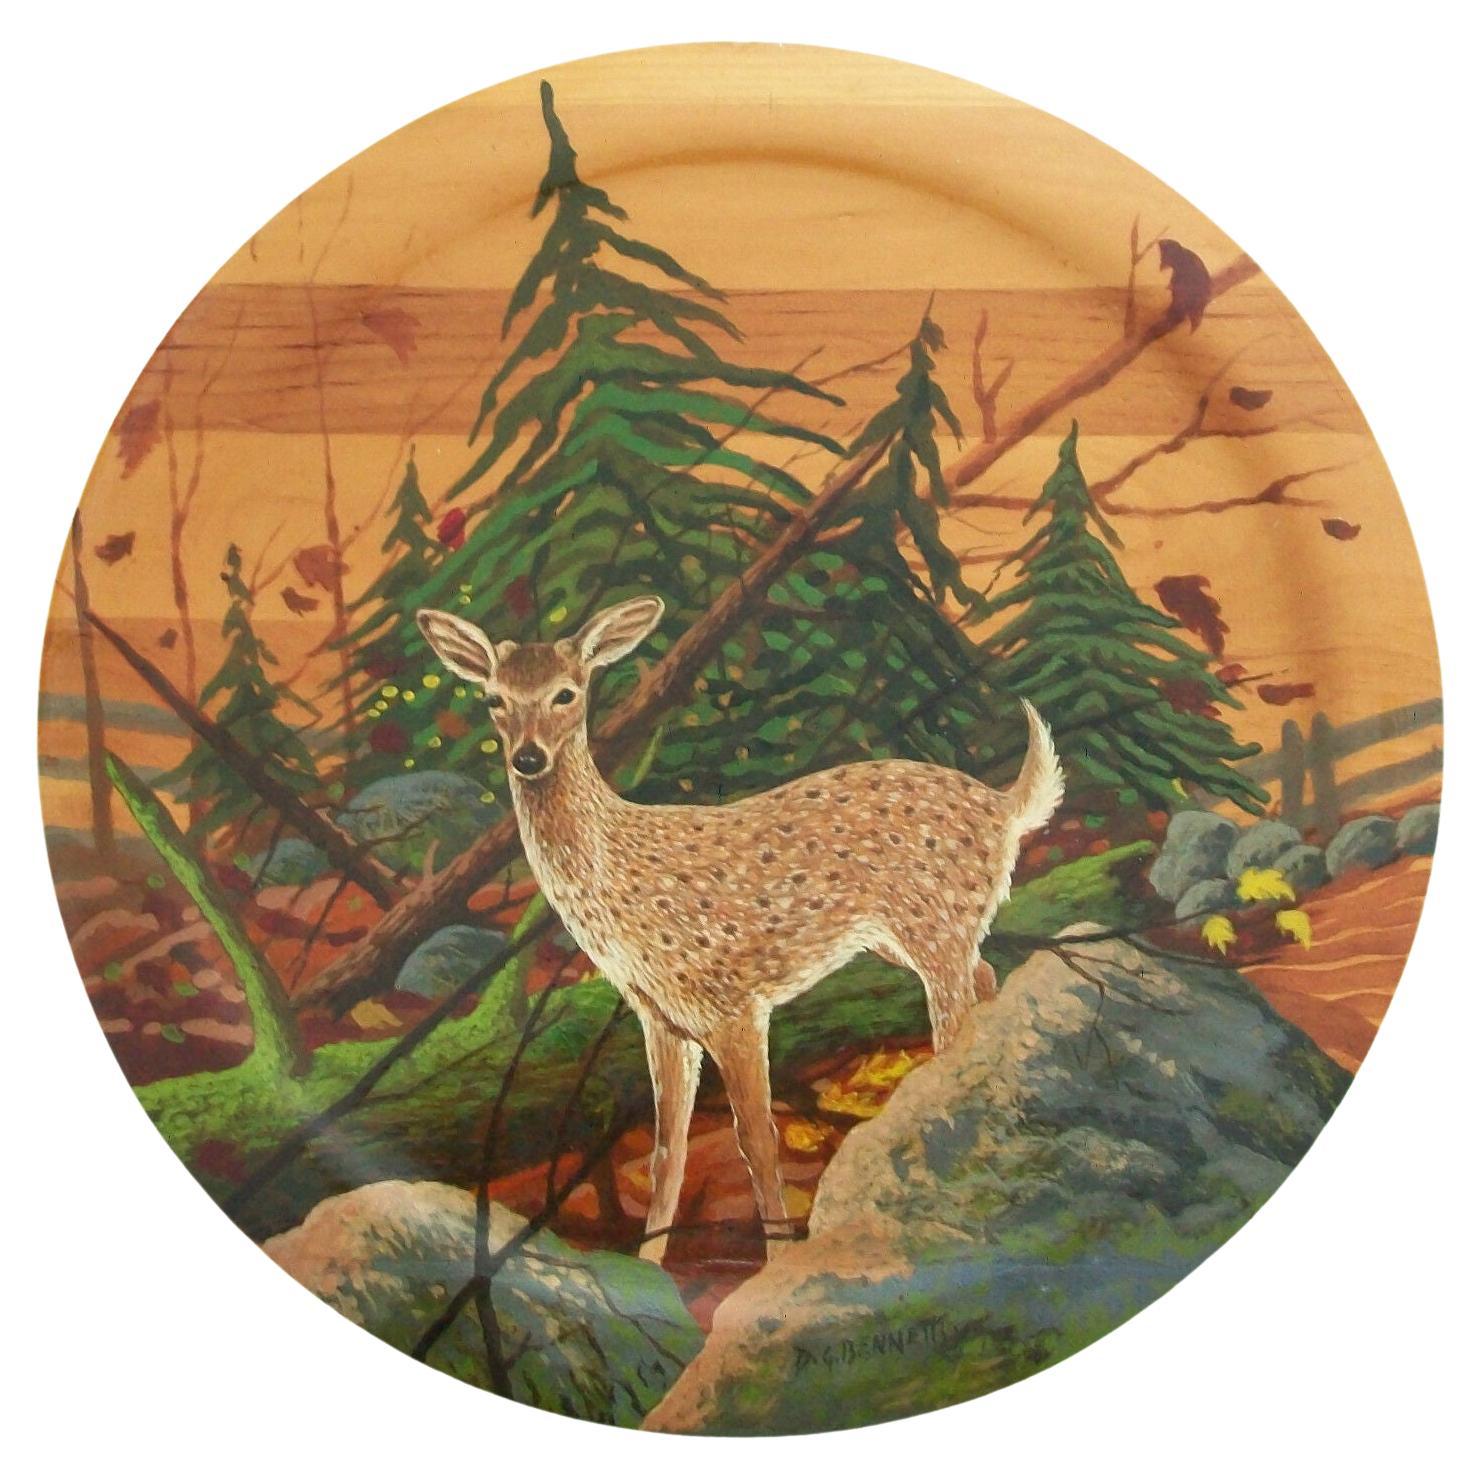 D.G. BENNETT - 'U.S. White Tailed Deer' - Painted Wood Plate - Late 20th Century